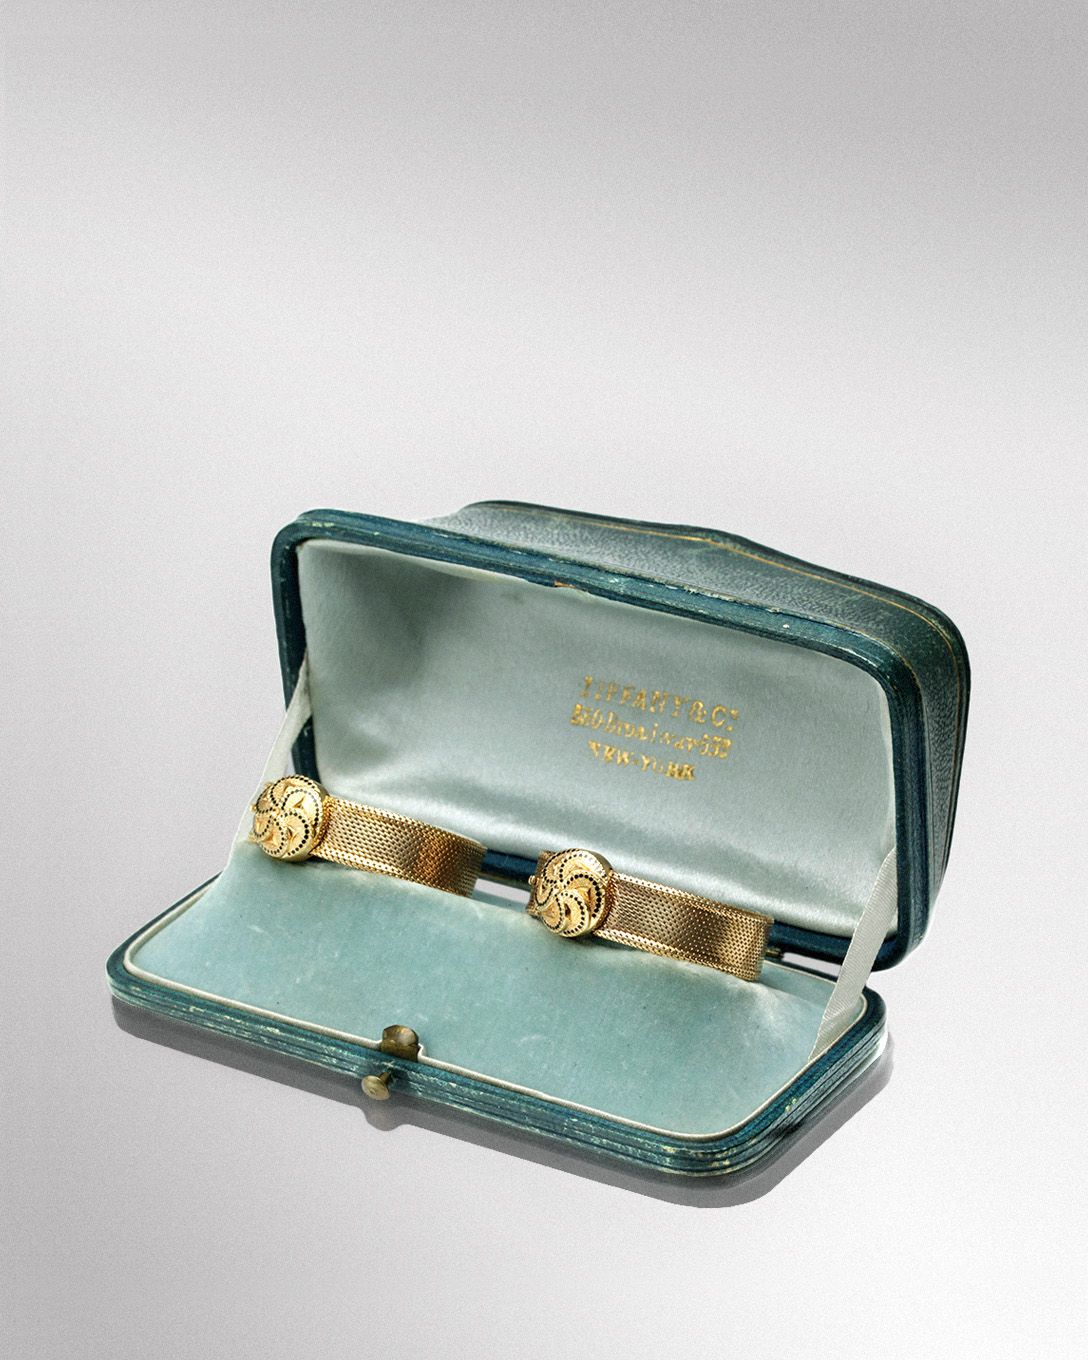 Tiffany & Co. History and Facts – Jack Weir & Sons